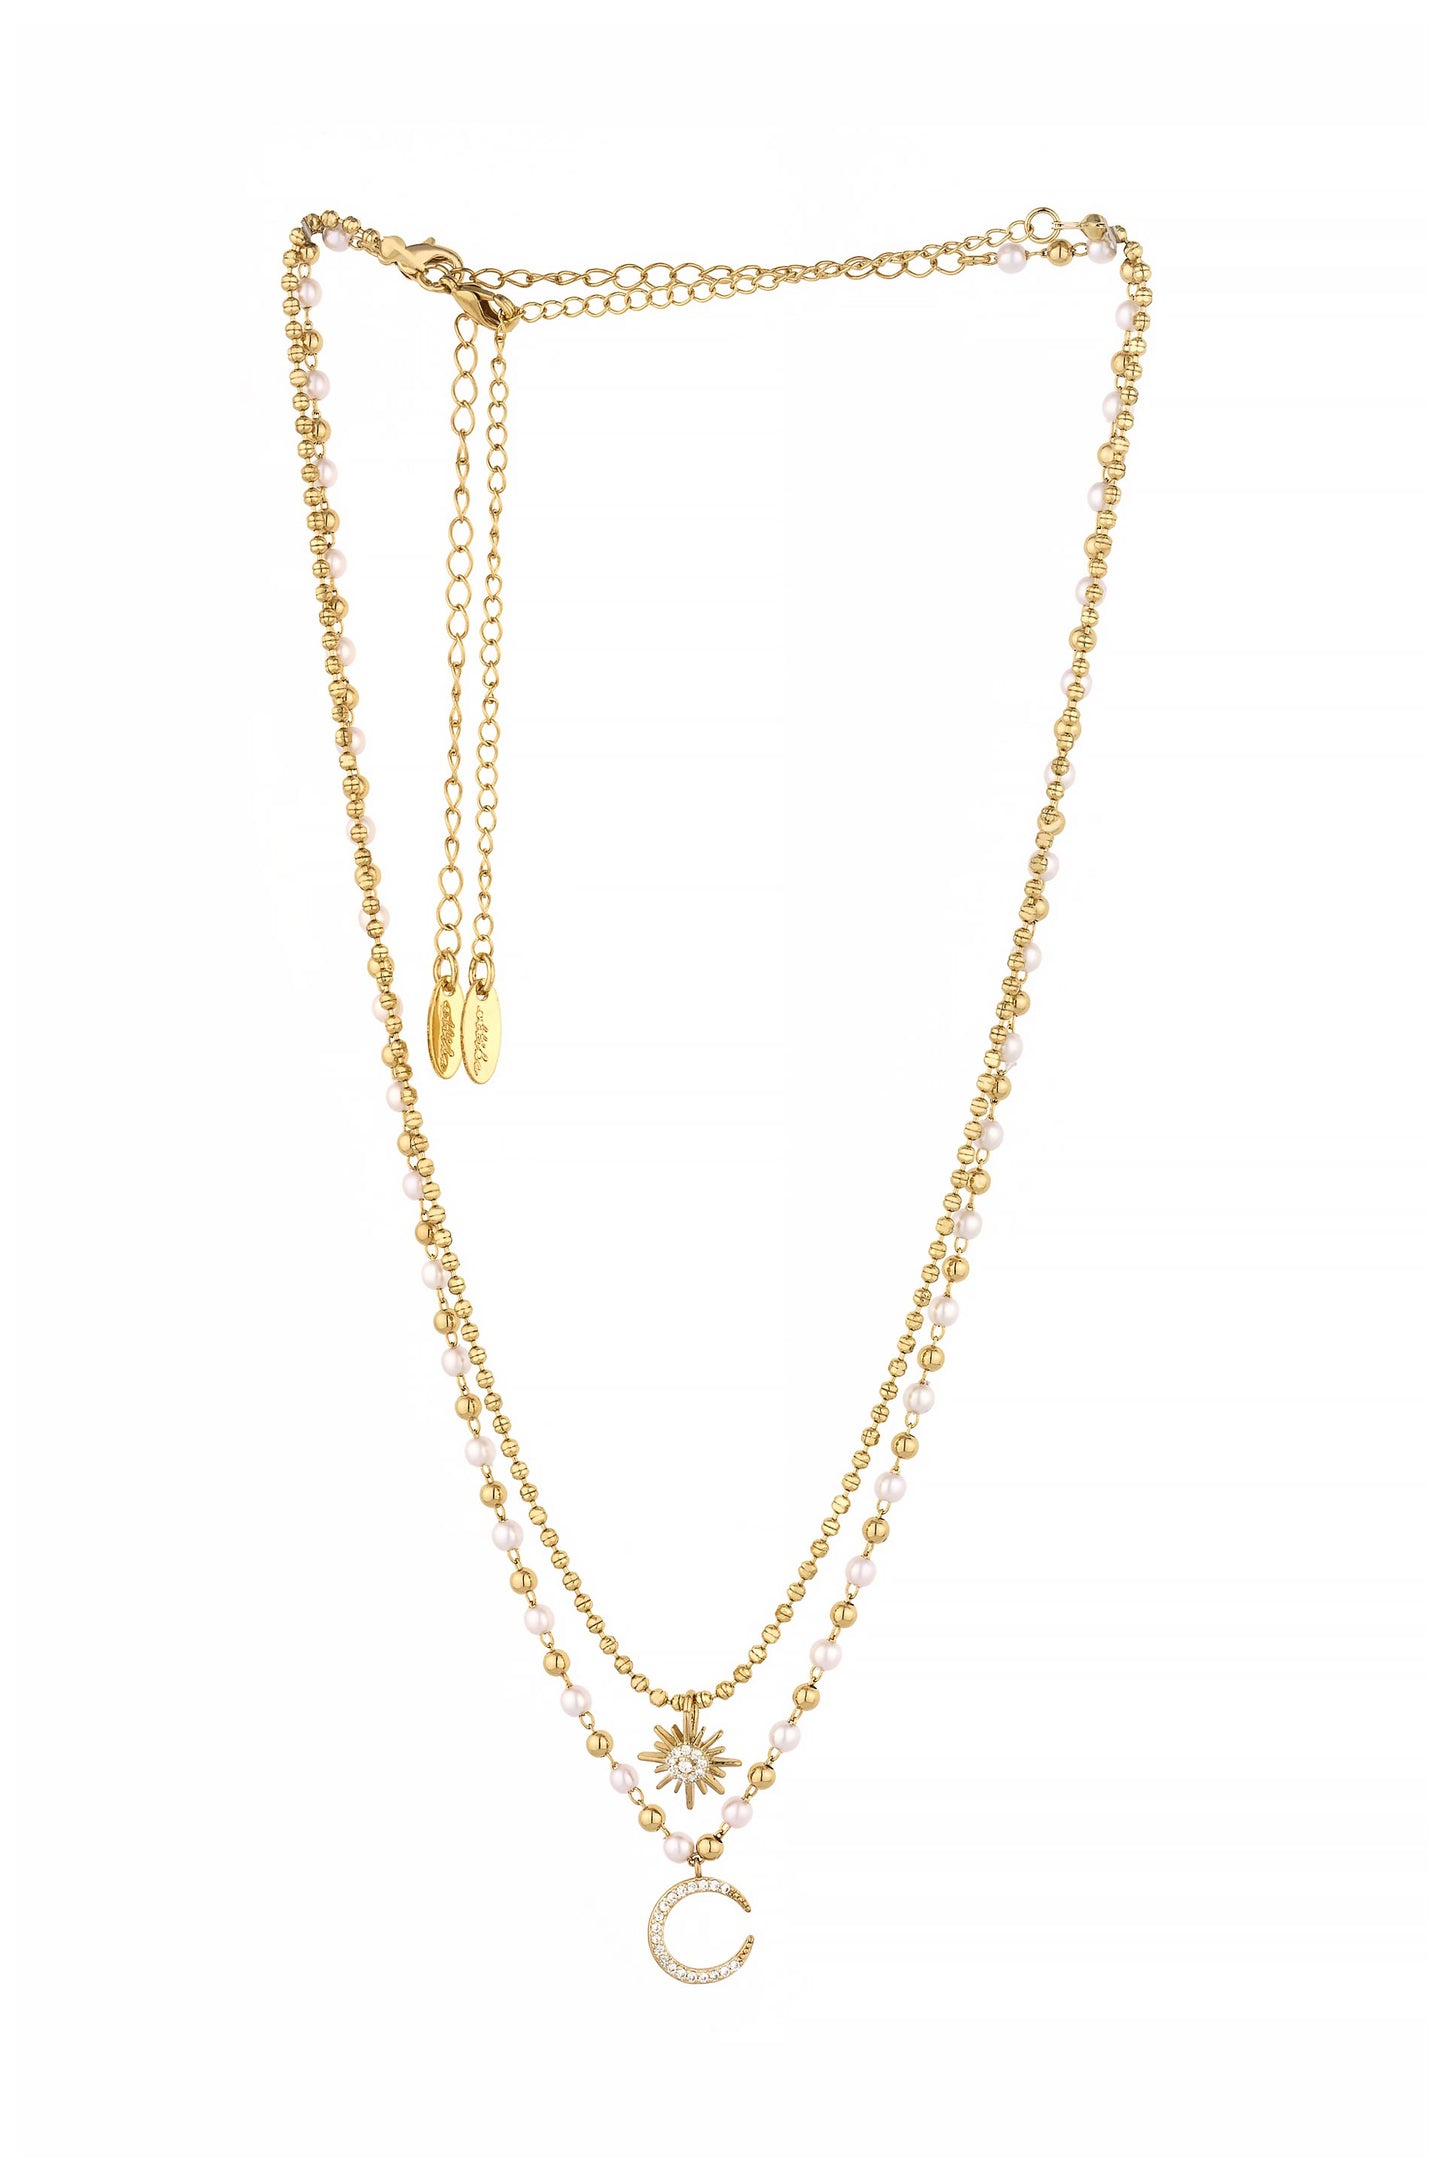 Interstellar Pearl and Crystal Layered 18k Gold Plated Necklace Set on white background